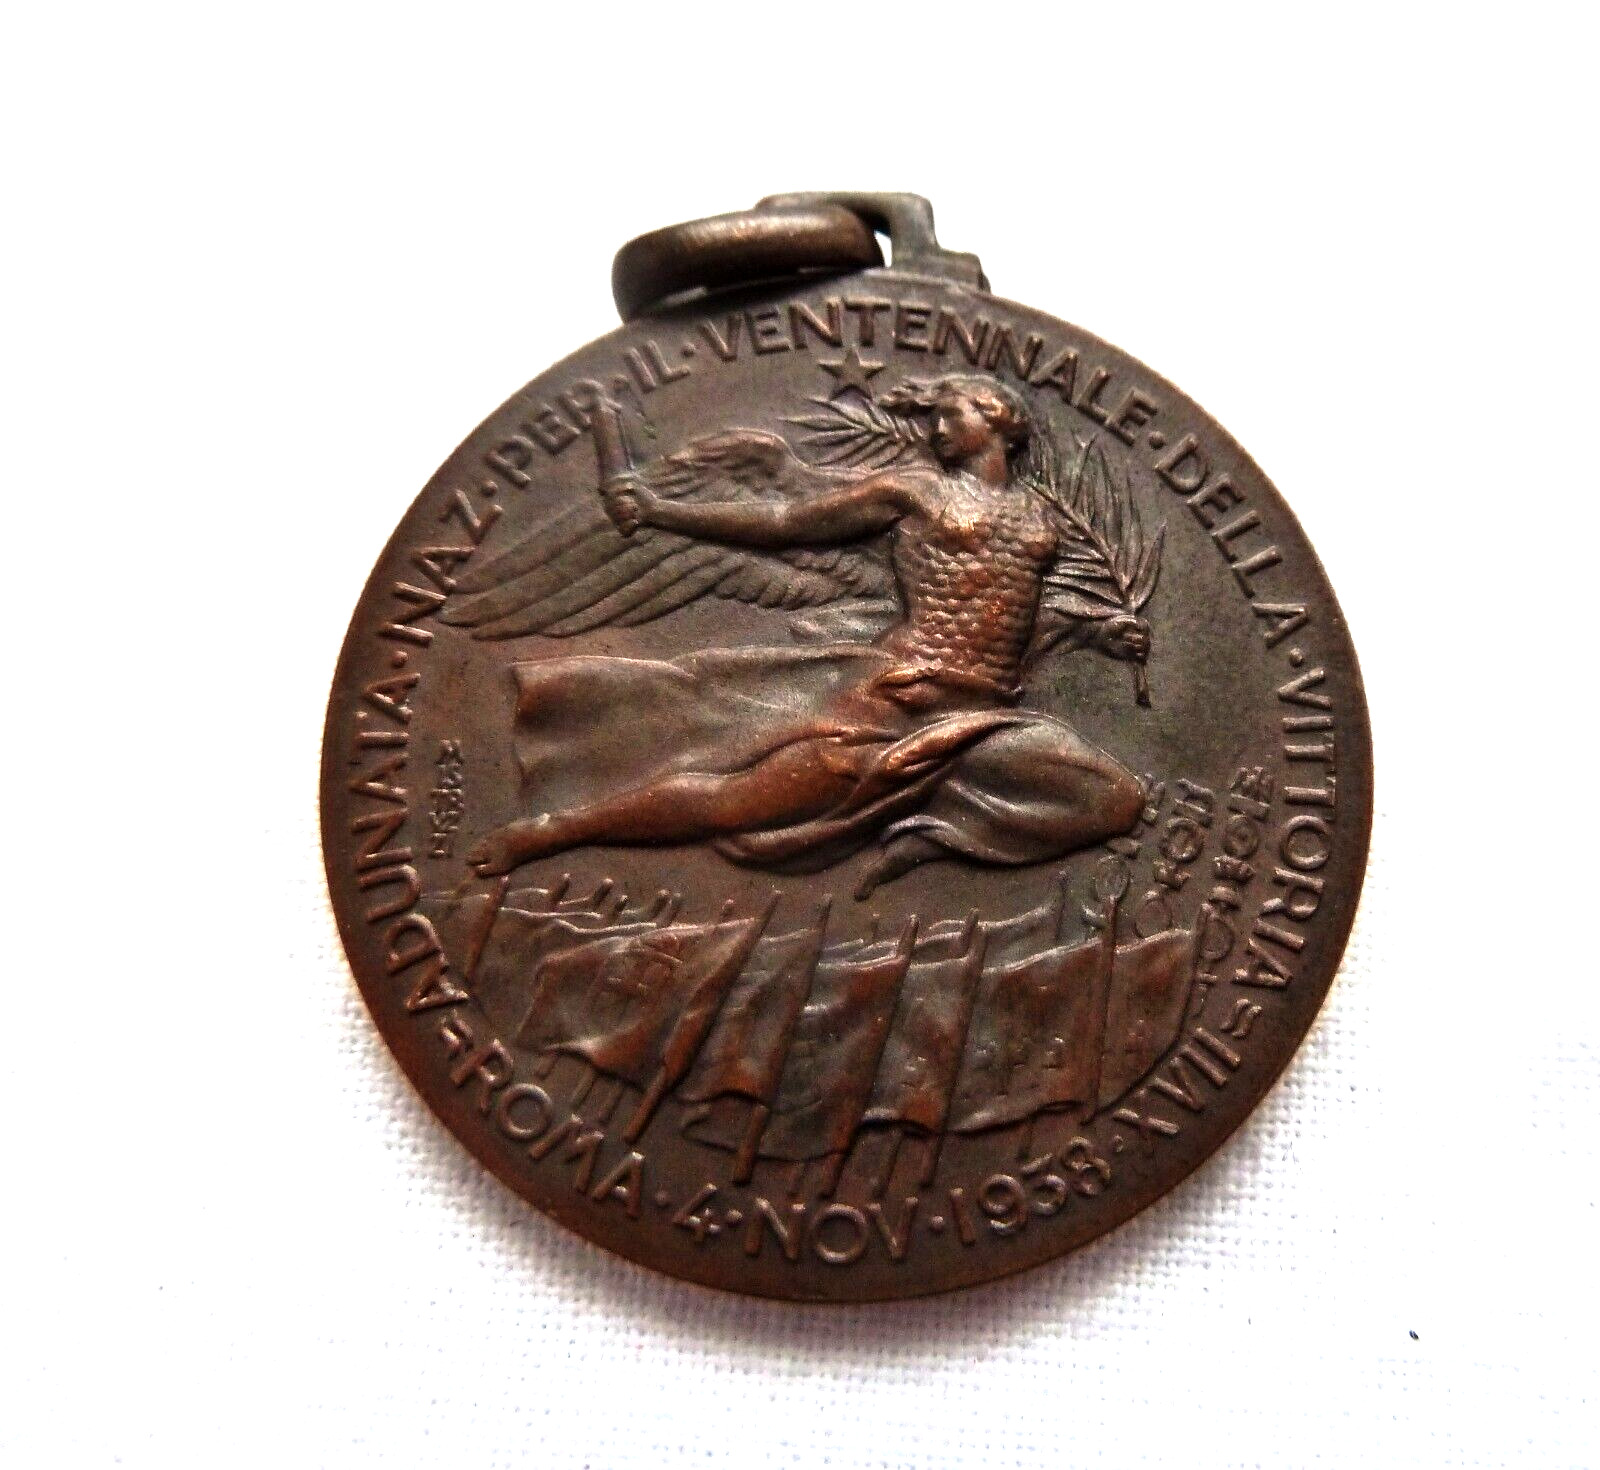 ITALIAN ITALY MEDAL FOR 20th ANNIVERSARY OF VICTORY OF FIRST WORLD WAR 1918 WWI